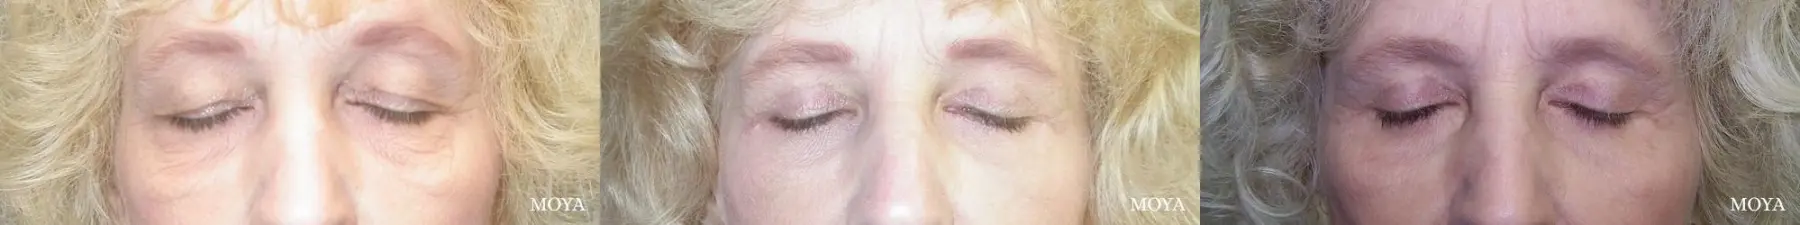 Eyelid Lift: Patient 5 - Before and After 2